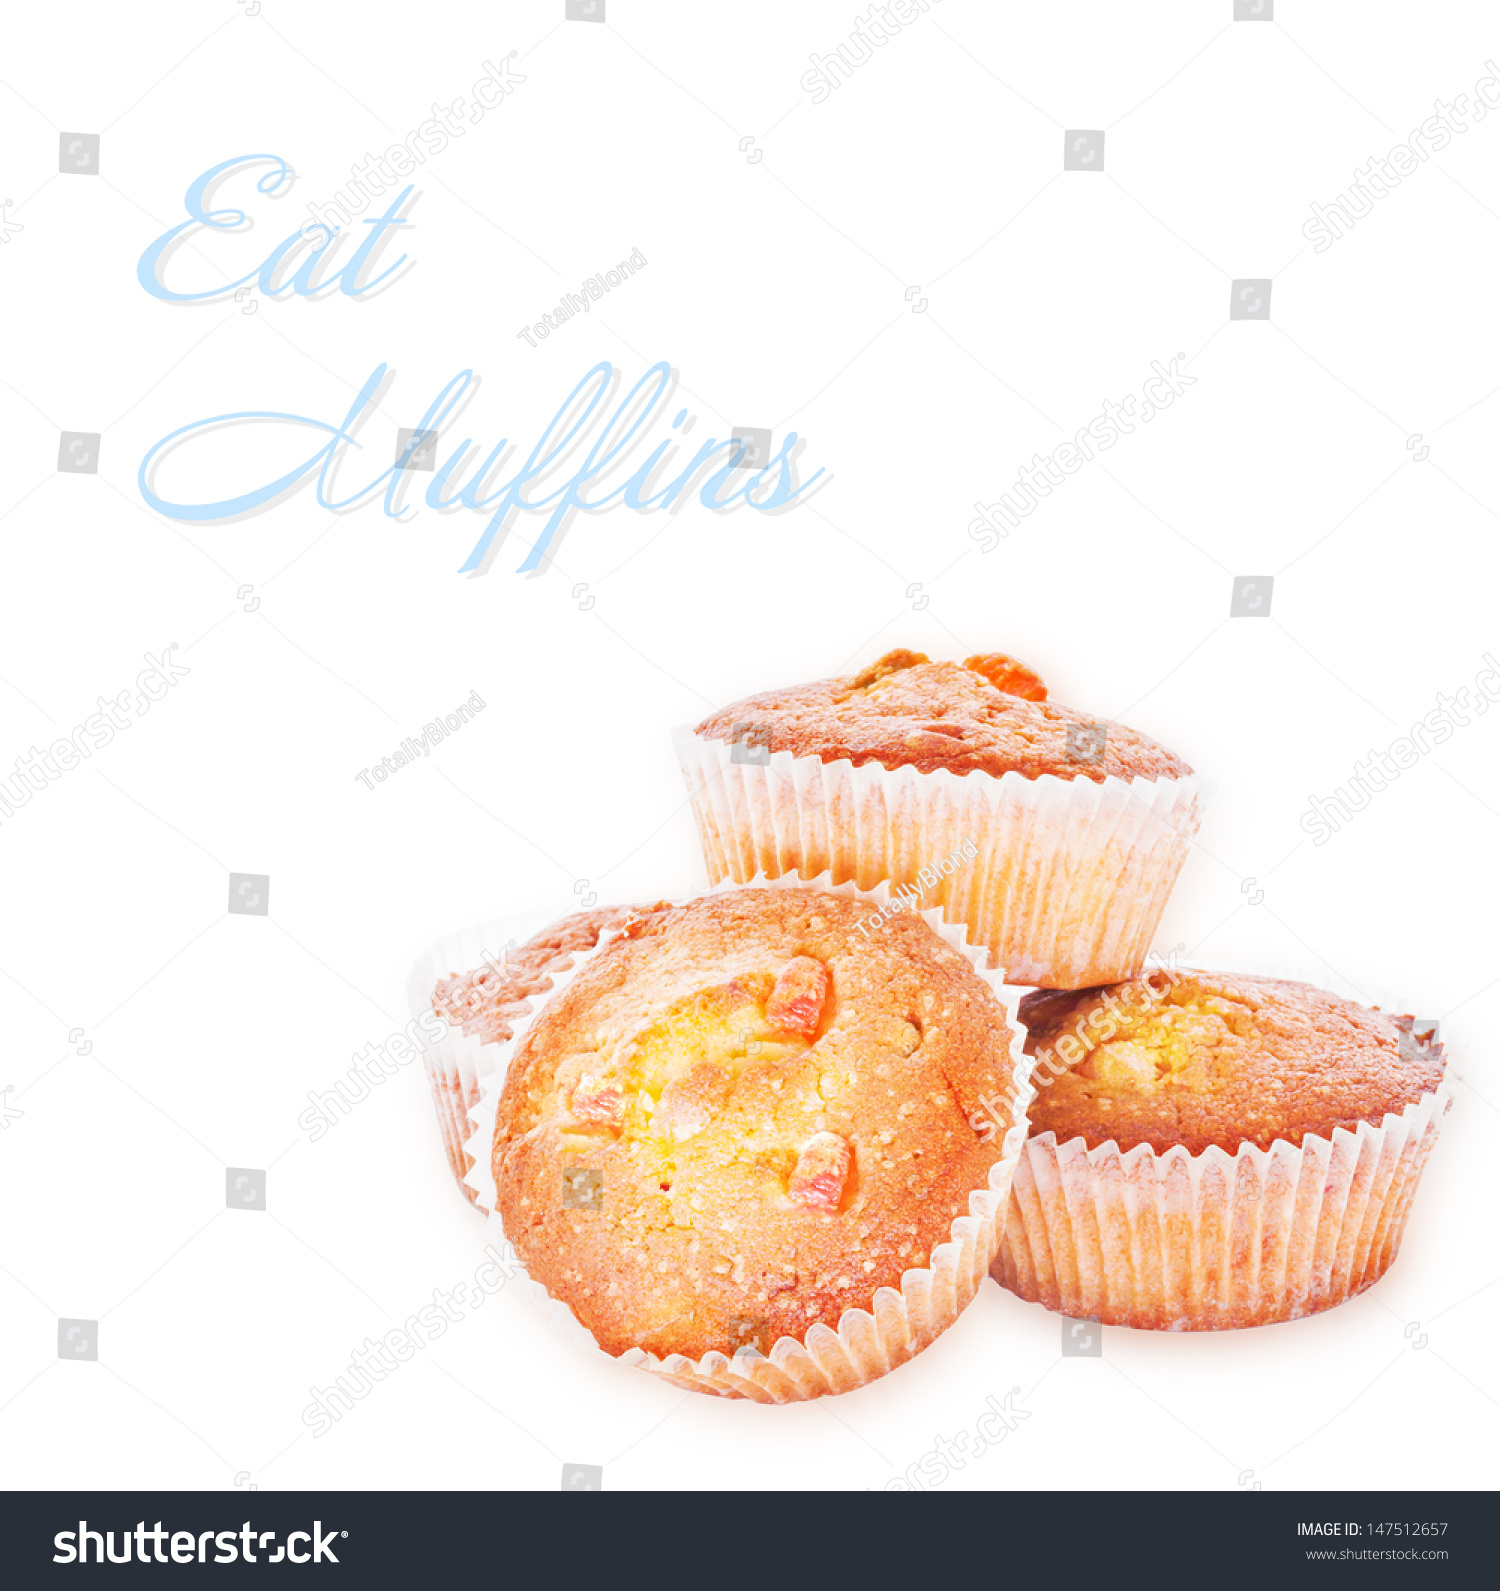 Tasty Muffin Cakes Background On White Stock Photo 147512657 ...